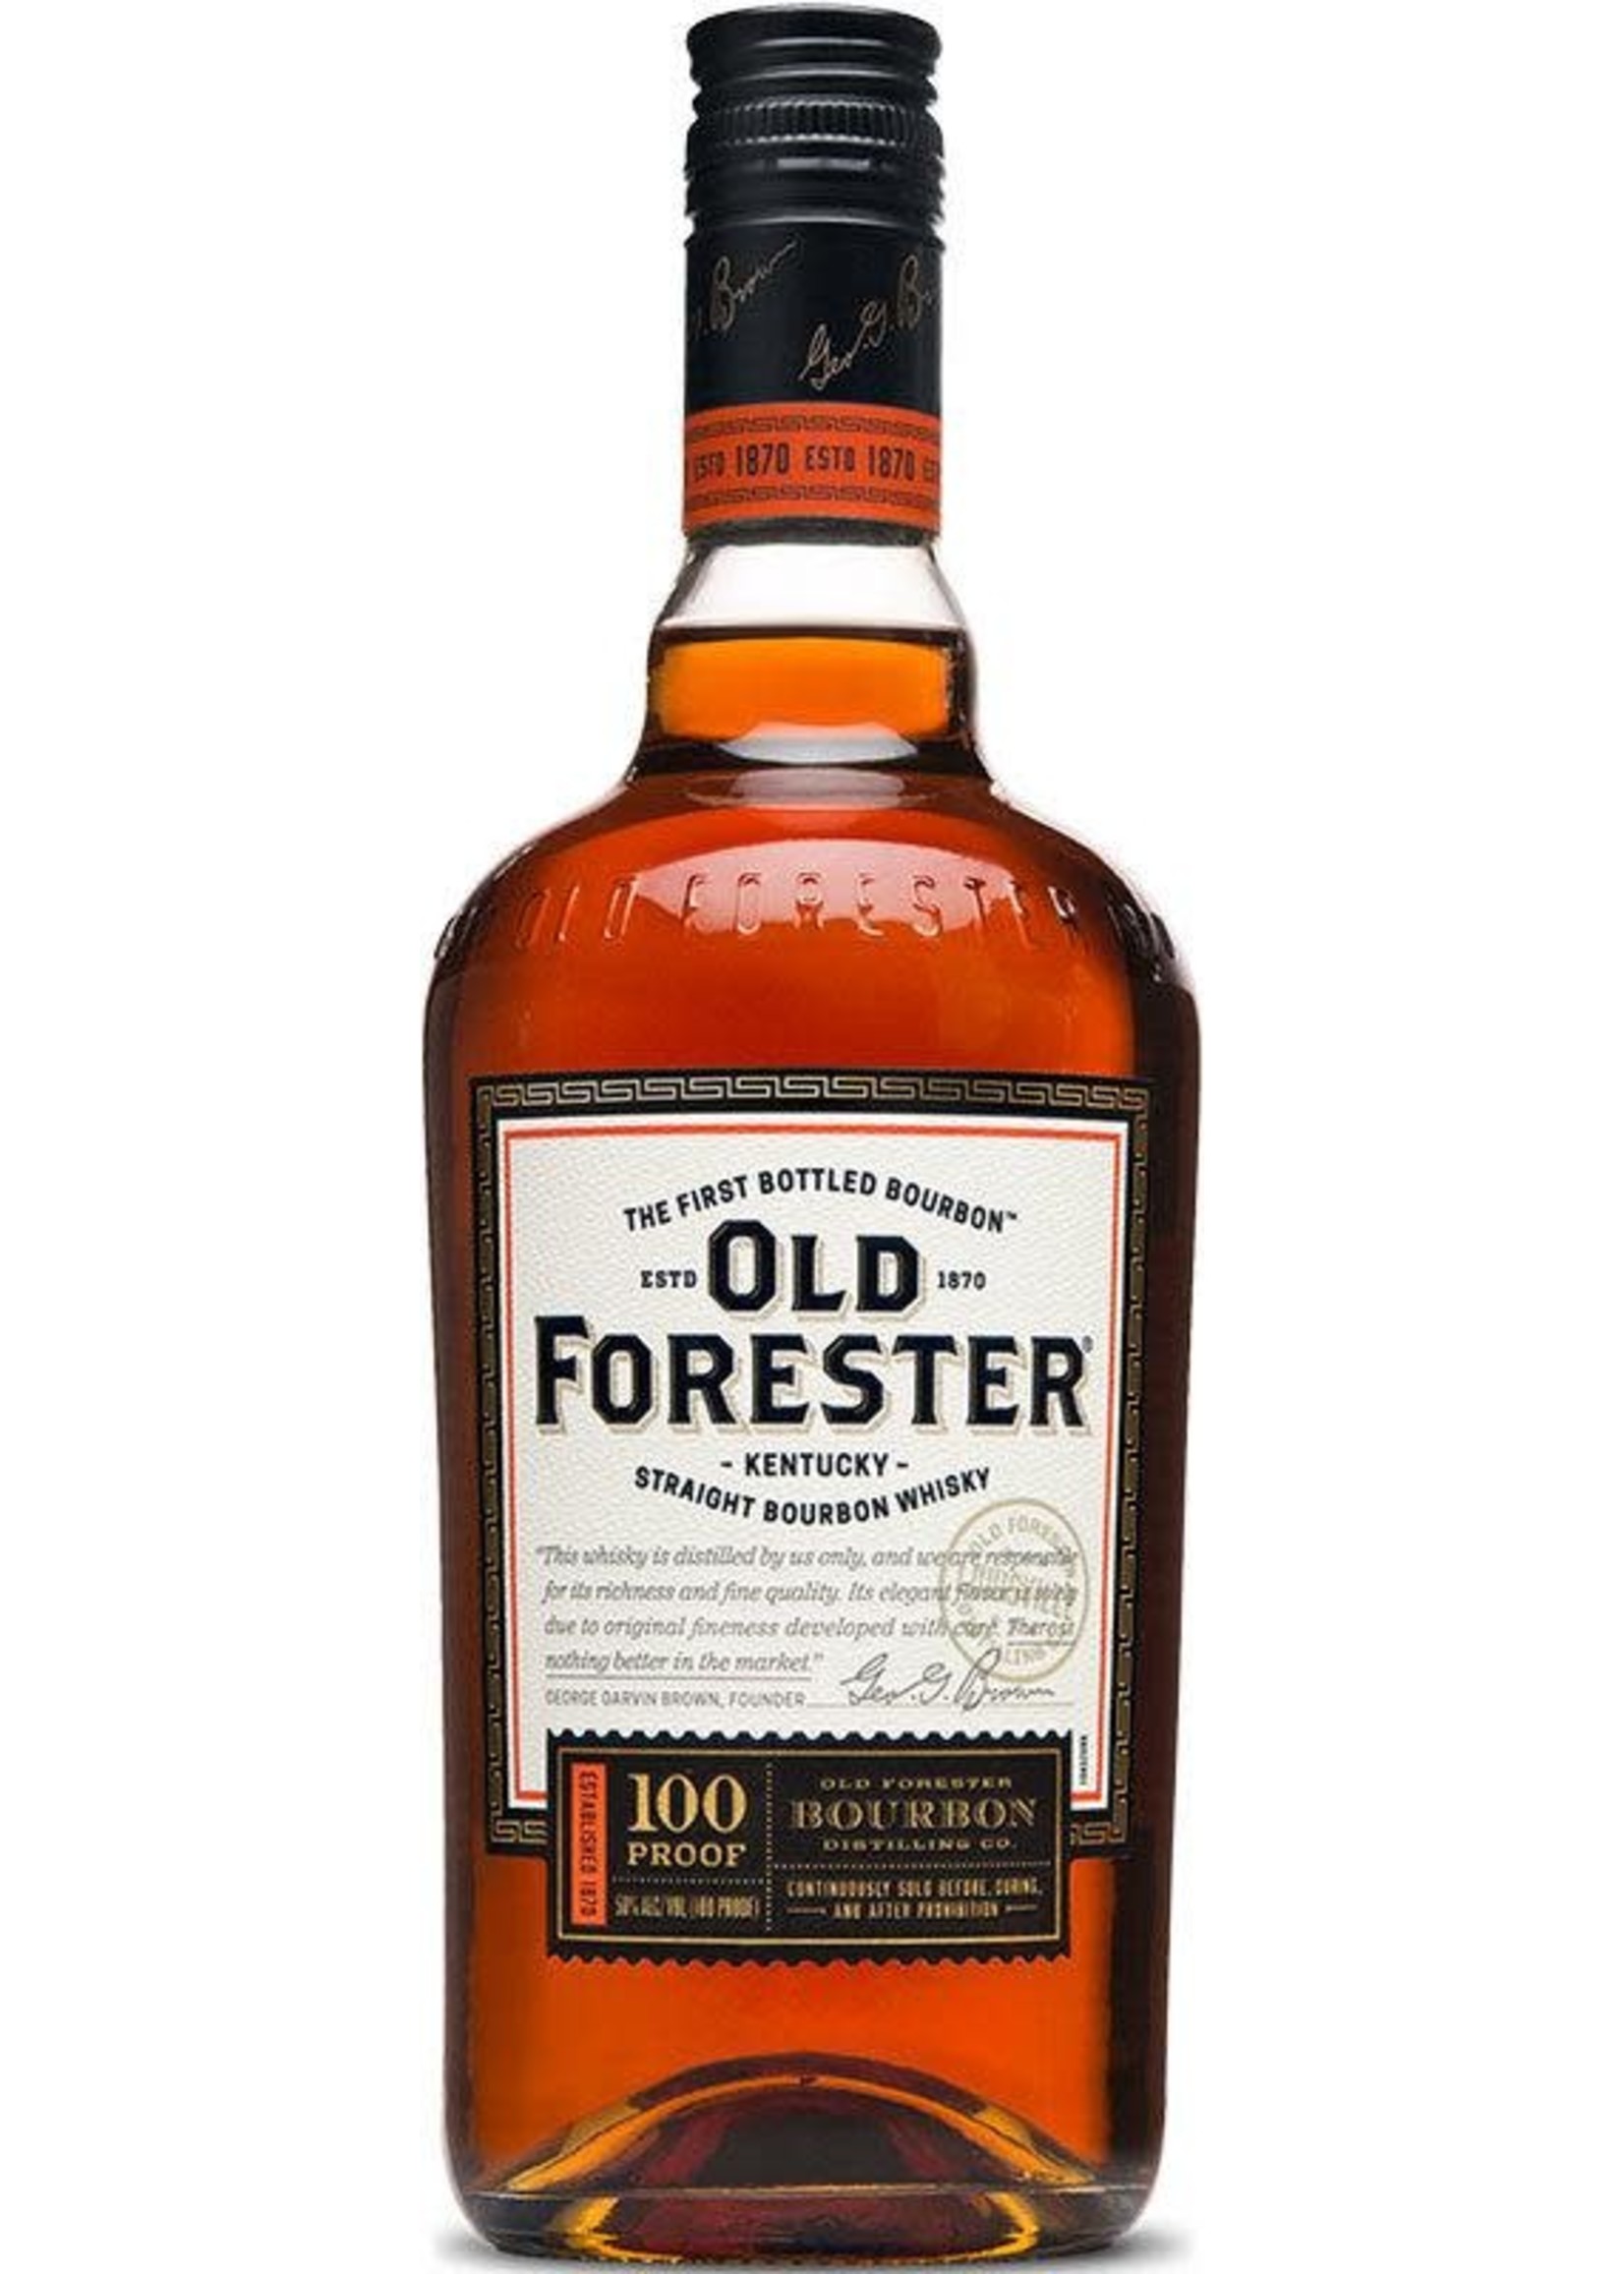 Old Forester Old Forester